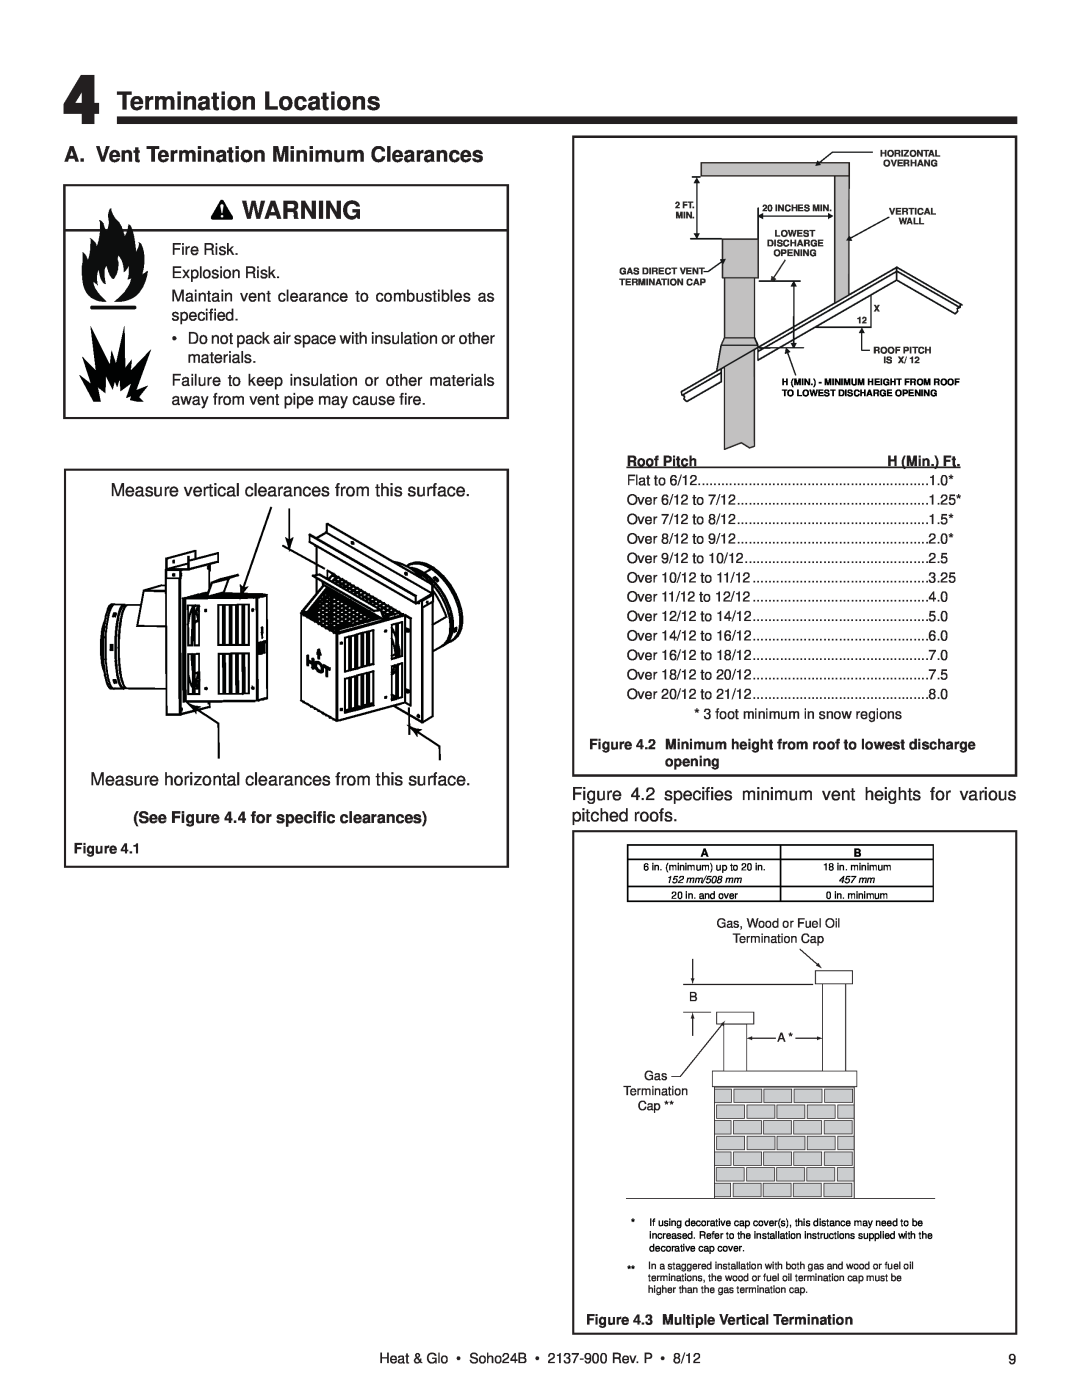 Heat & Glo LifeStyle 2137-900 Termination Locations, A. Vent Termination Minimum Clearances, See .4 for speciﬁc clearances 